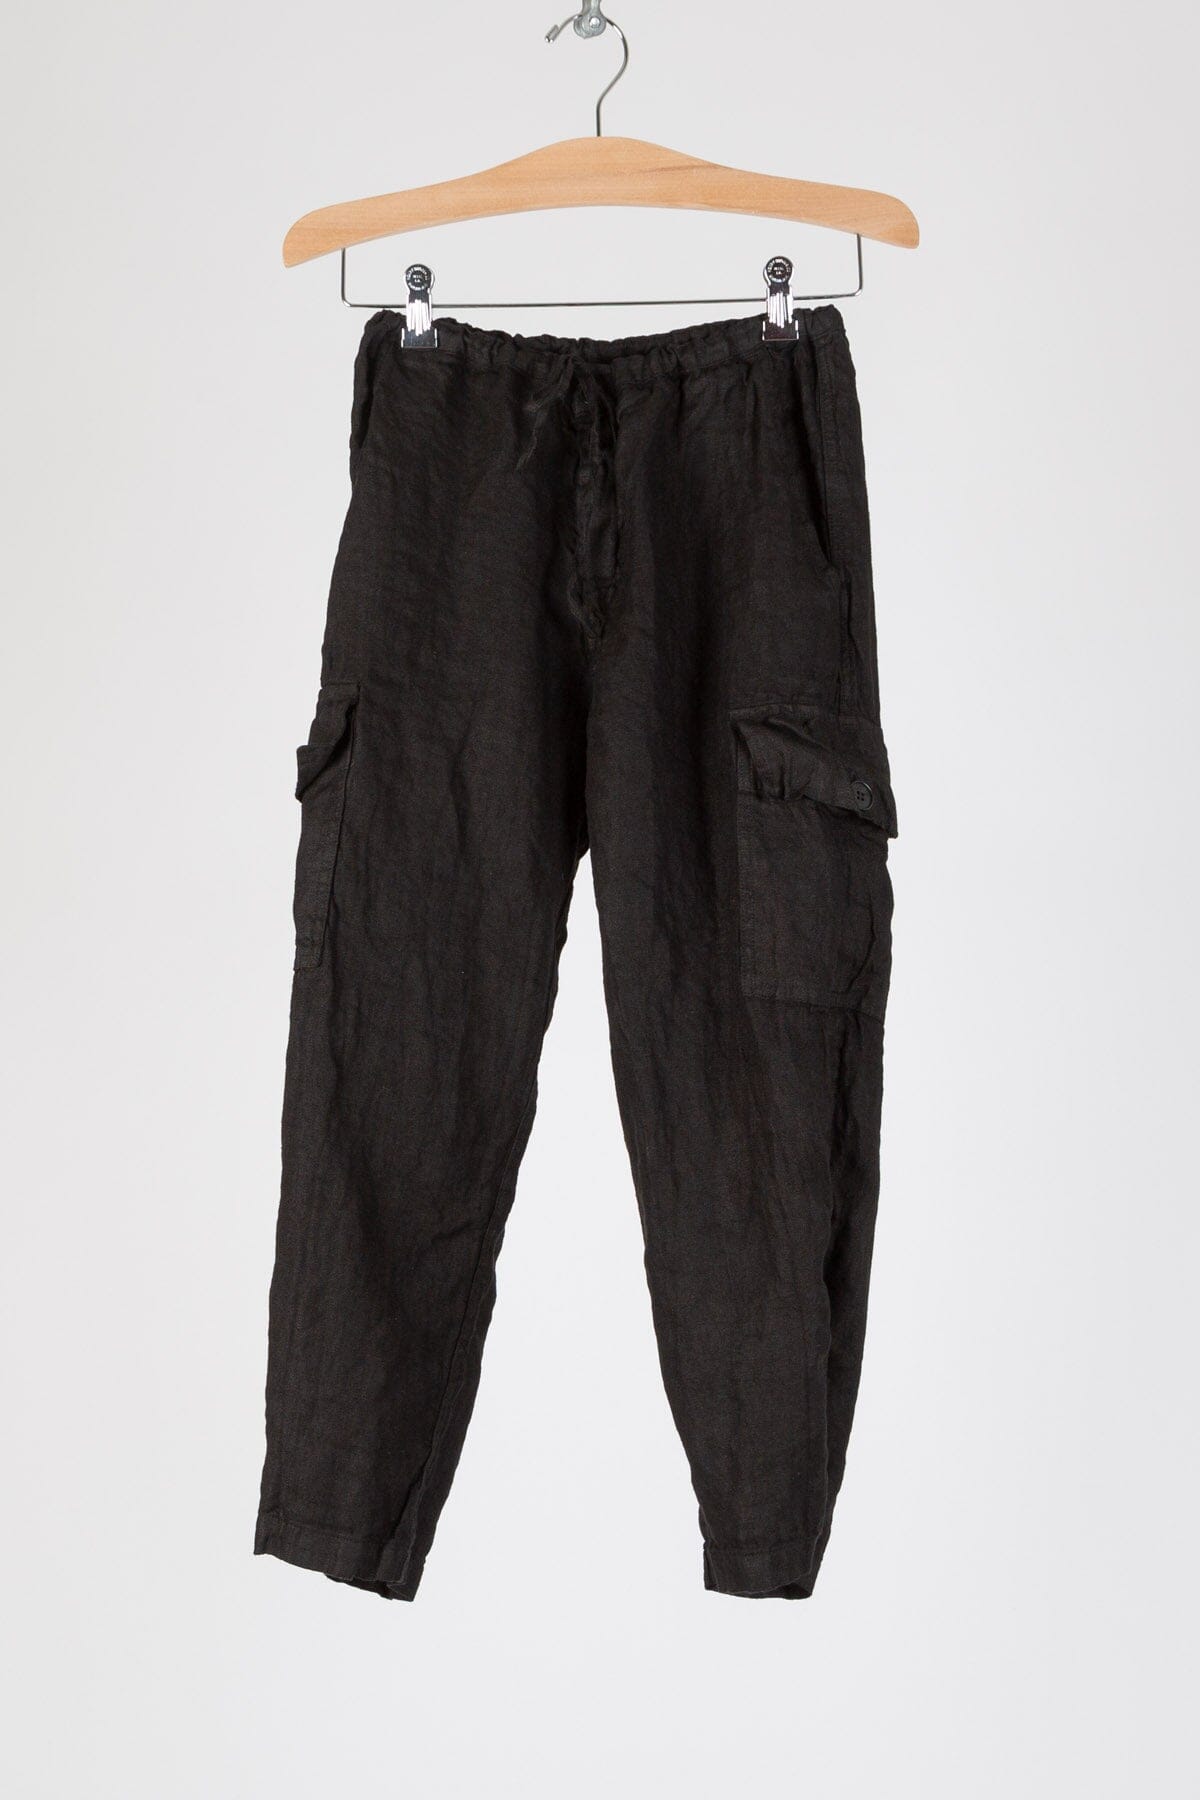 Cropped Cargo - Linen Twill S21 - 893 Bottoms CP Shades 